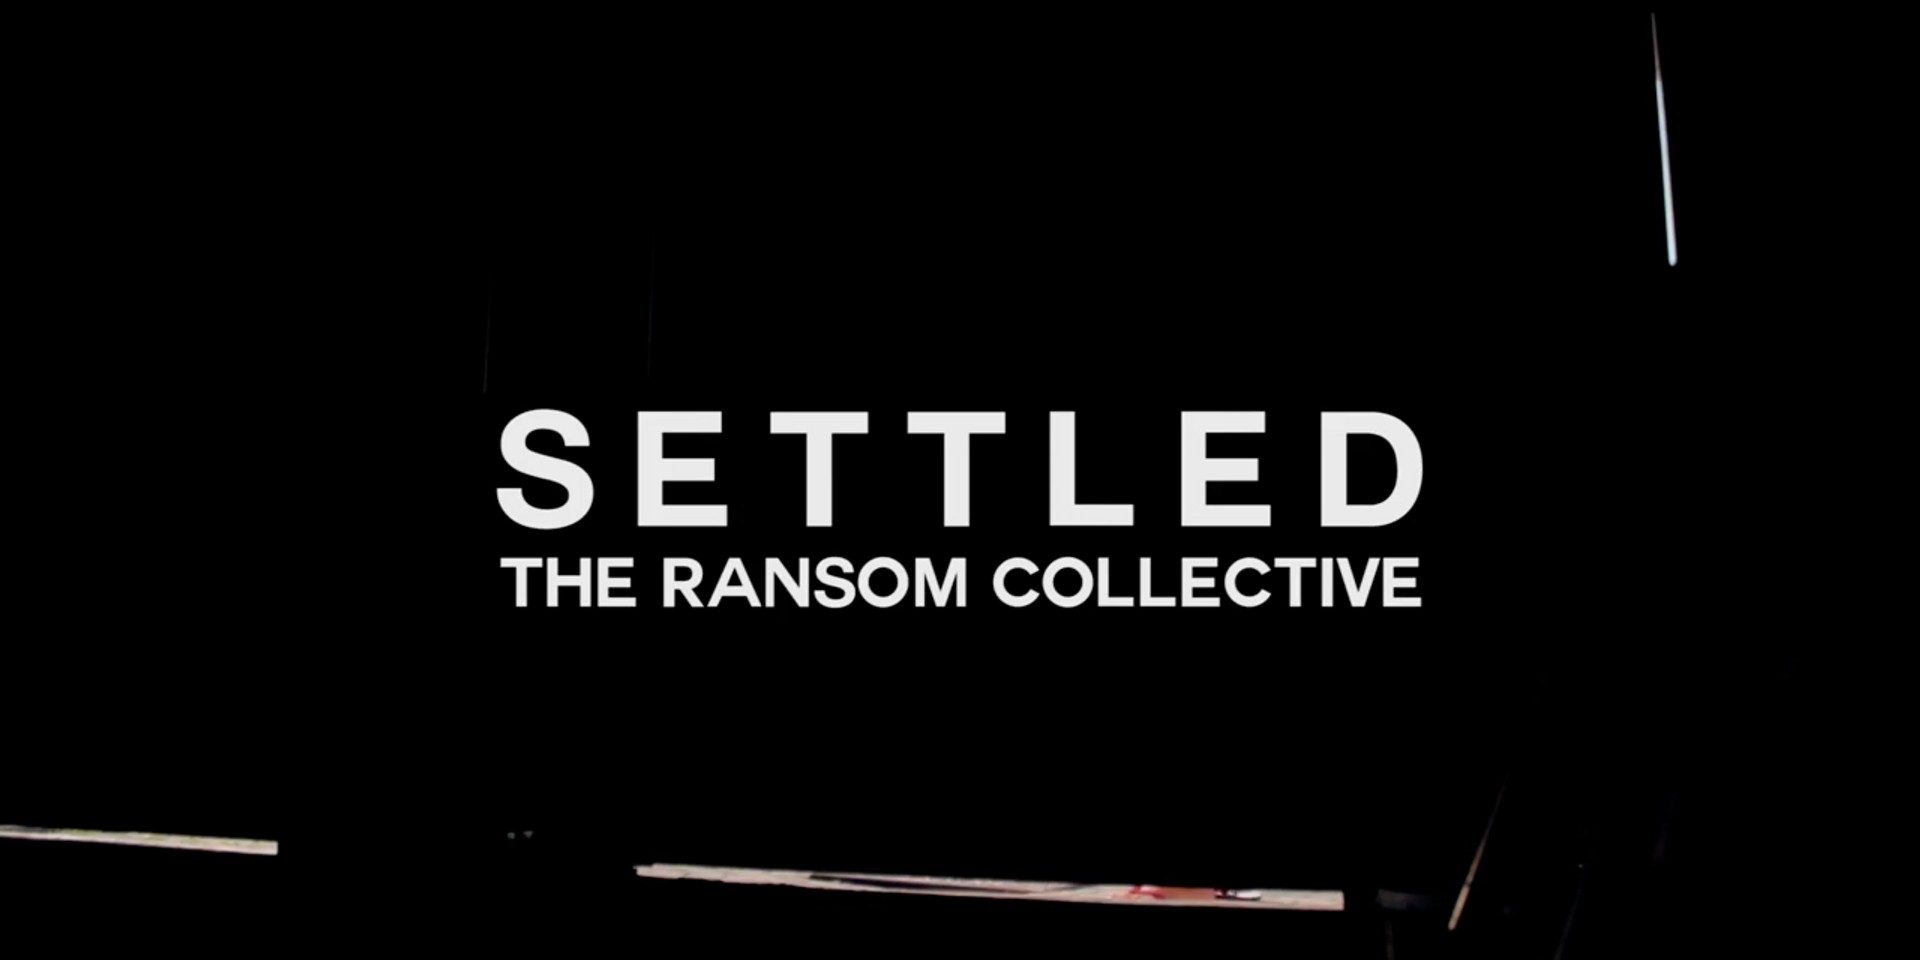 WATCH: The Ransom Collective ignite wanderlust in their lyric video for 'Settled'